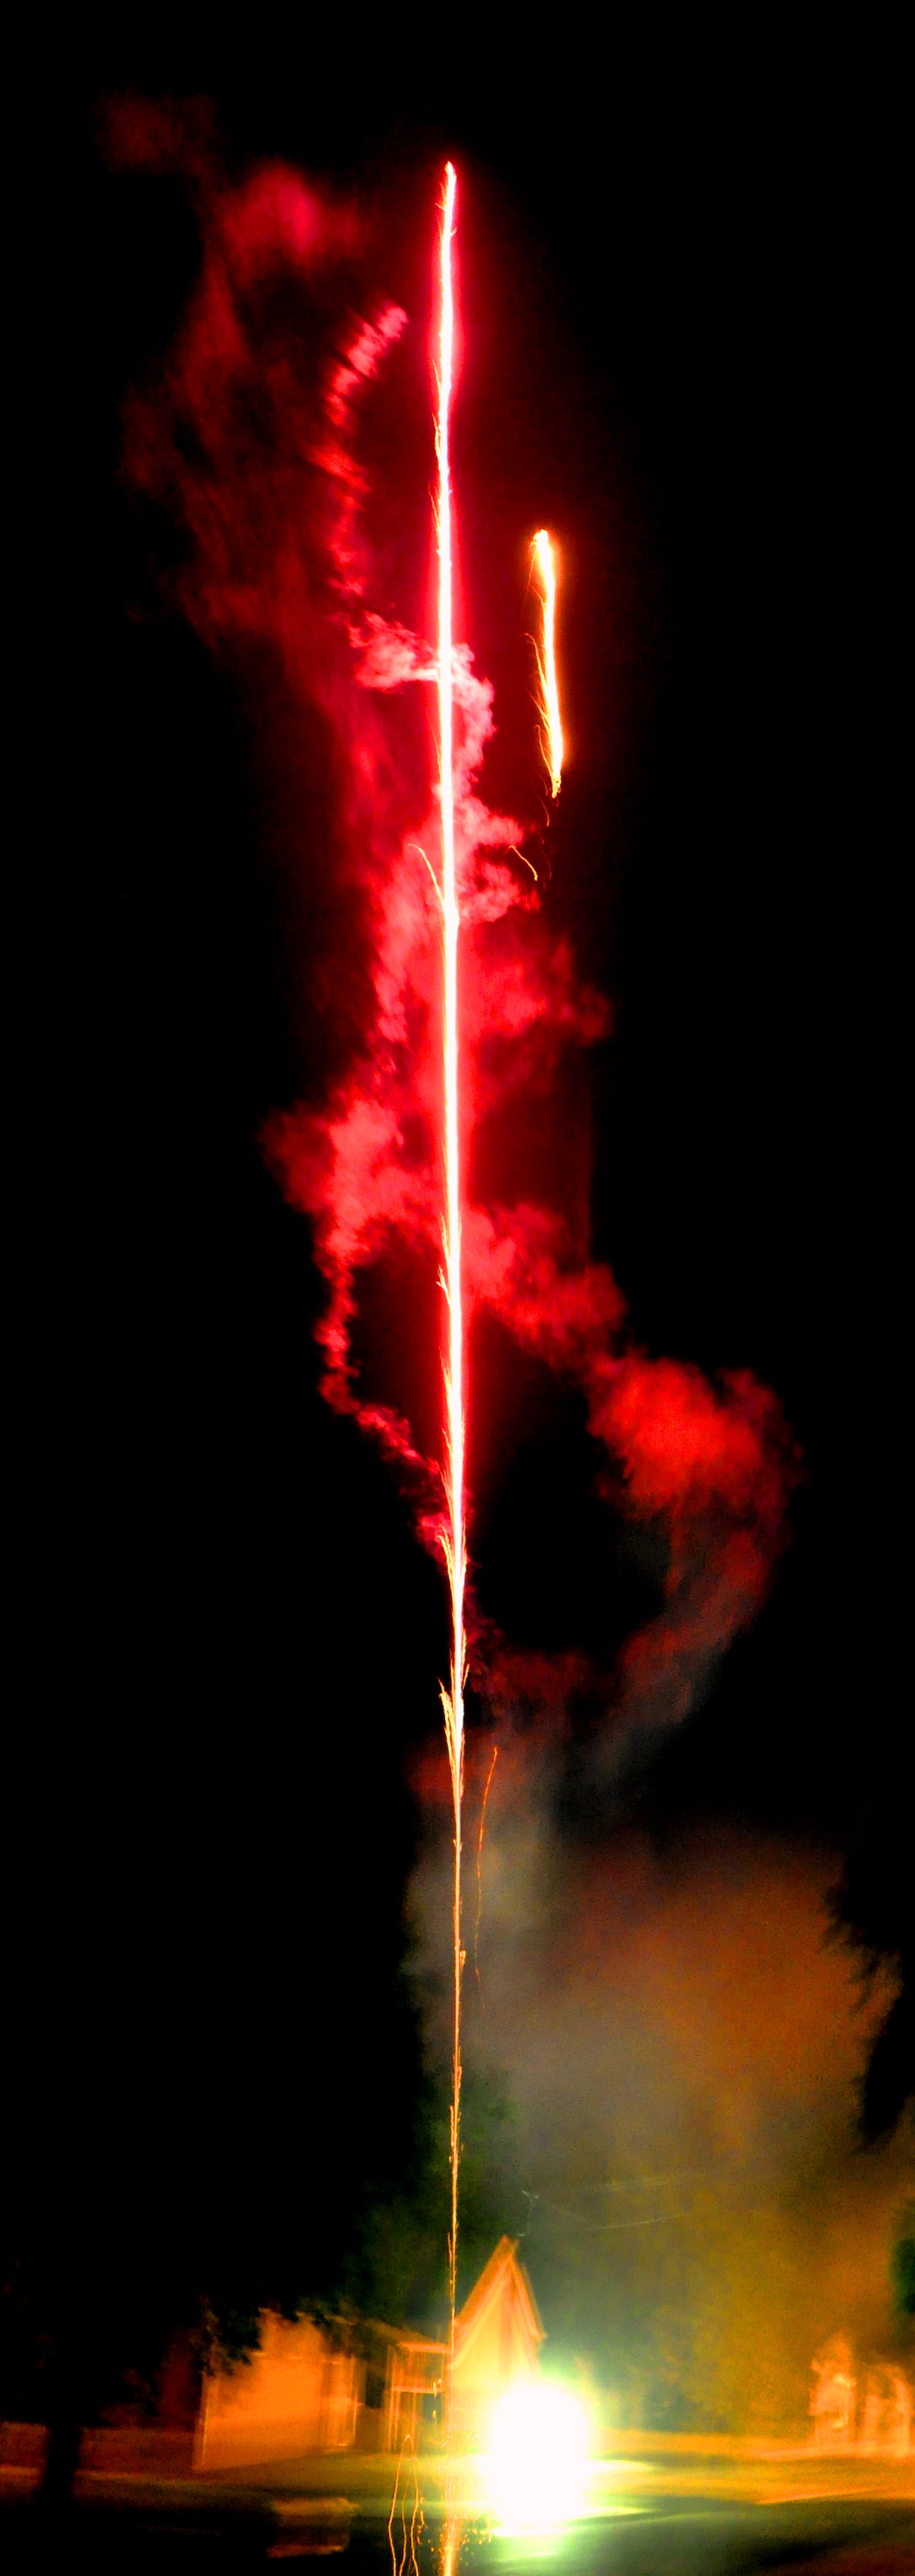 Large colorful fireworks photo